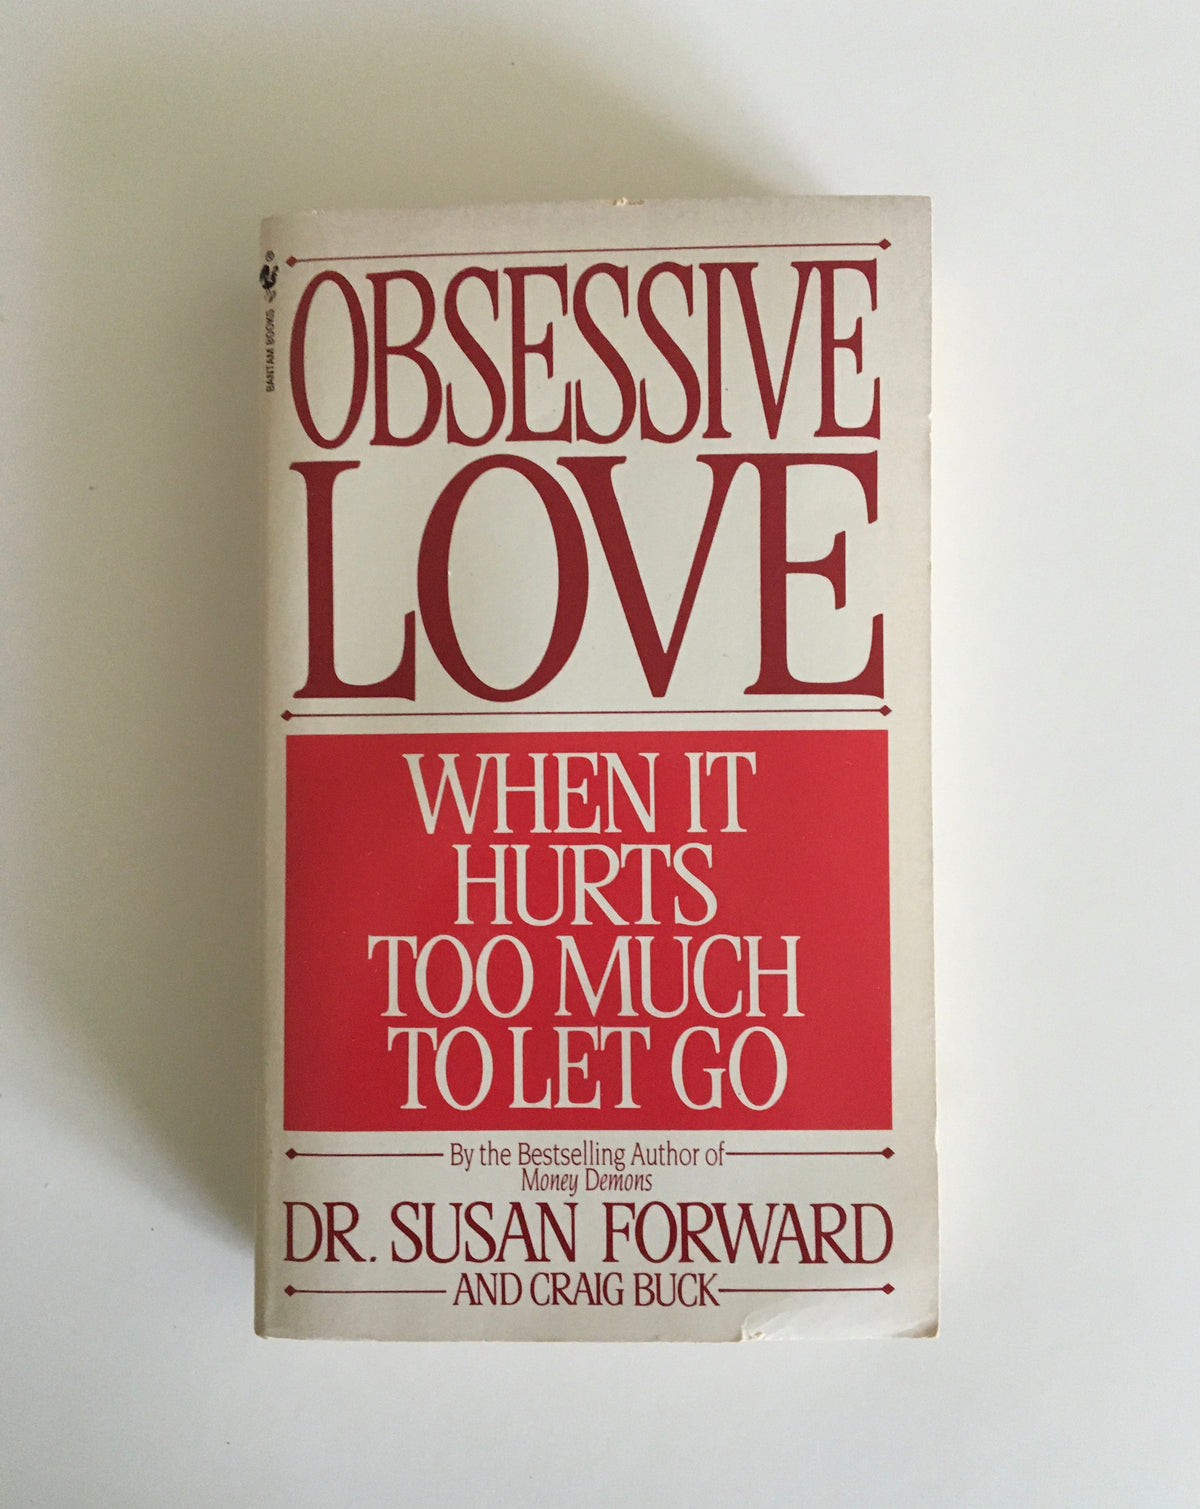 DONATE: Obsessive Love by Harriet Lerner